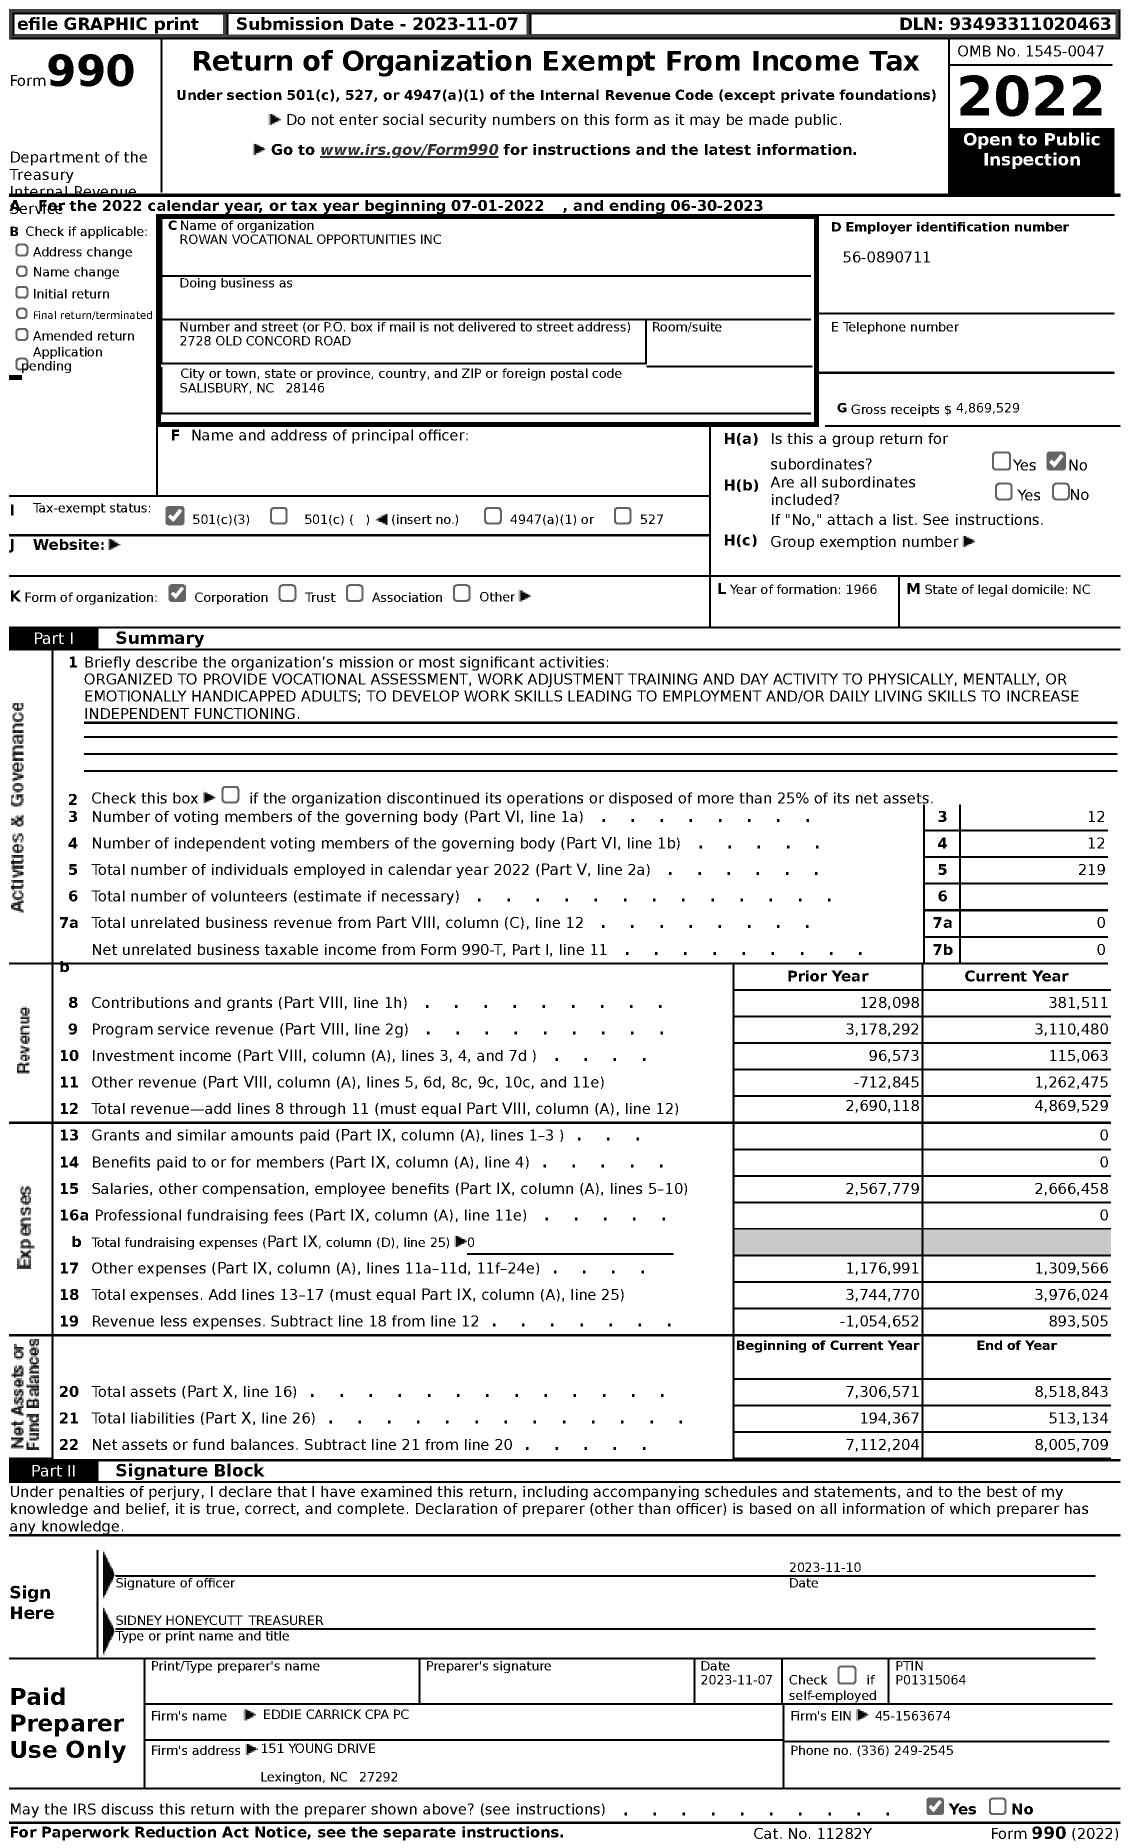 Image of first page of 2022 Form 990 for Rowan Vocational Opportunities